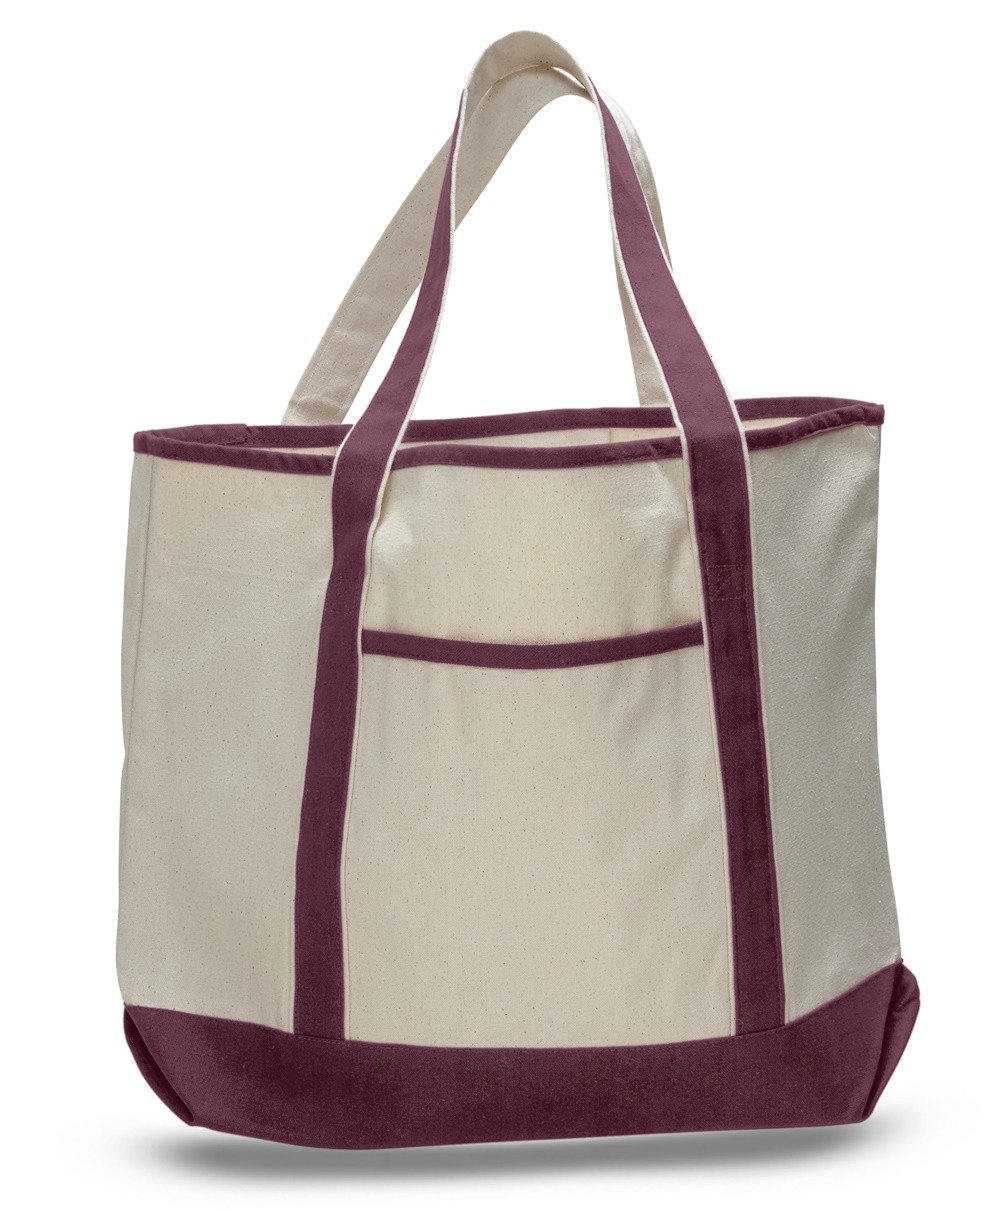 Maroon Reusable Canvas Deluxe Tote Bag